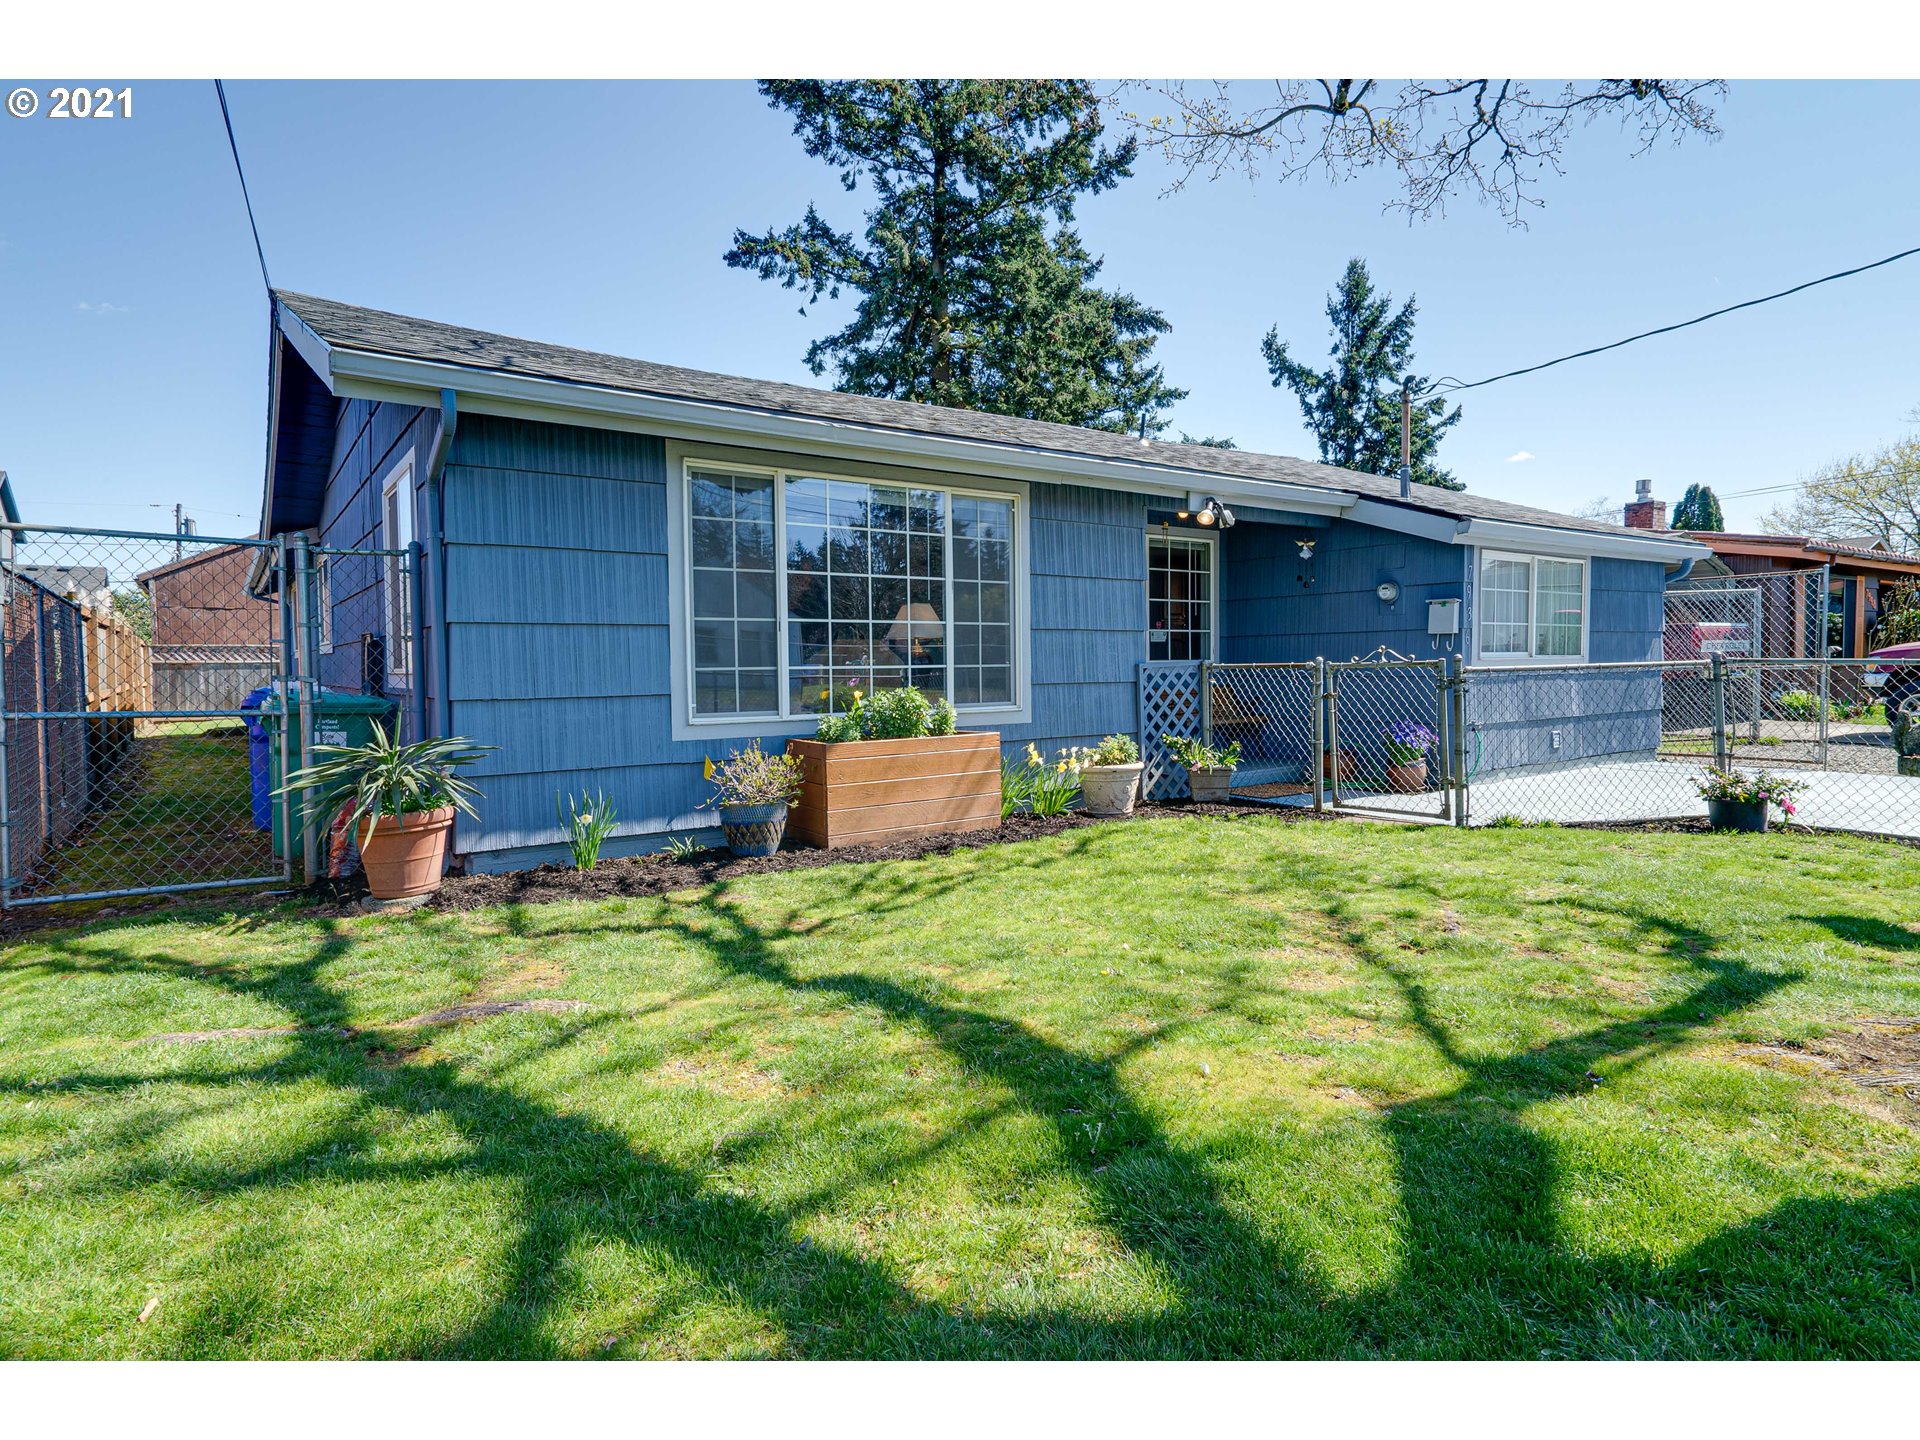 7936 SE 64TH AVE (1 of 31)